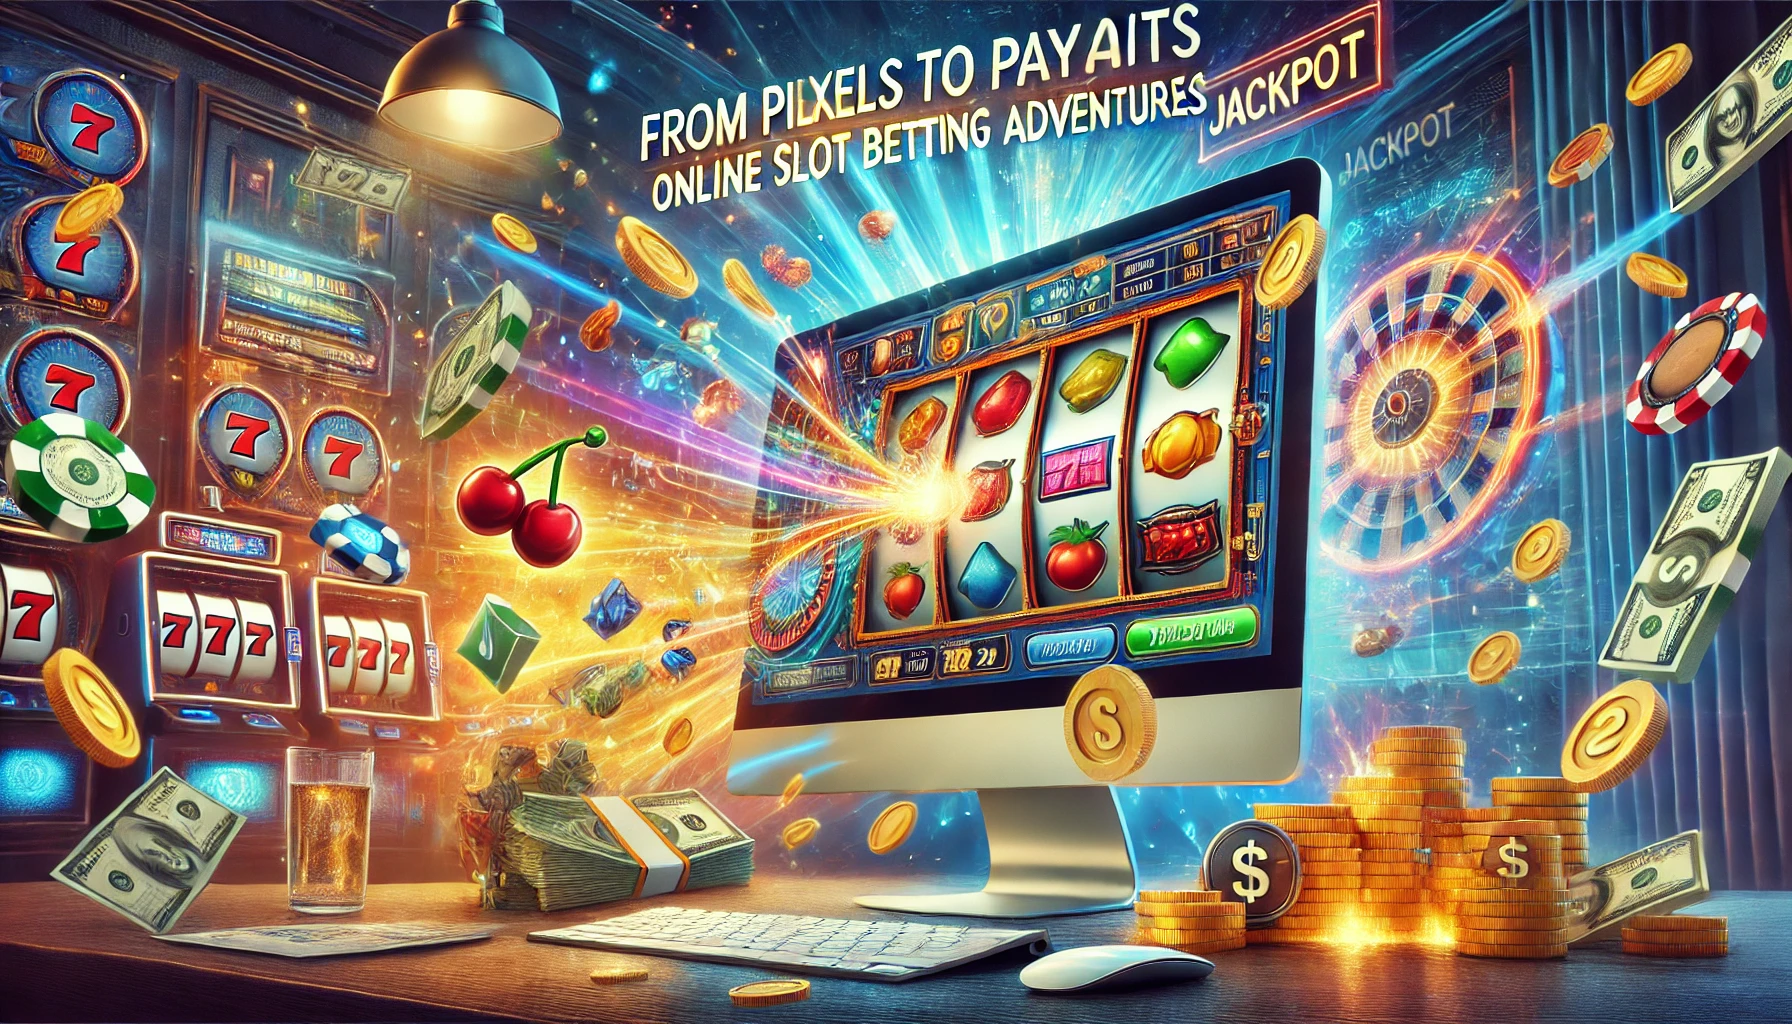 From Pixels to Payouts Online Slot Betting Adventures